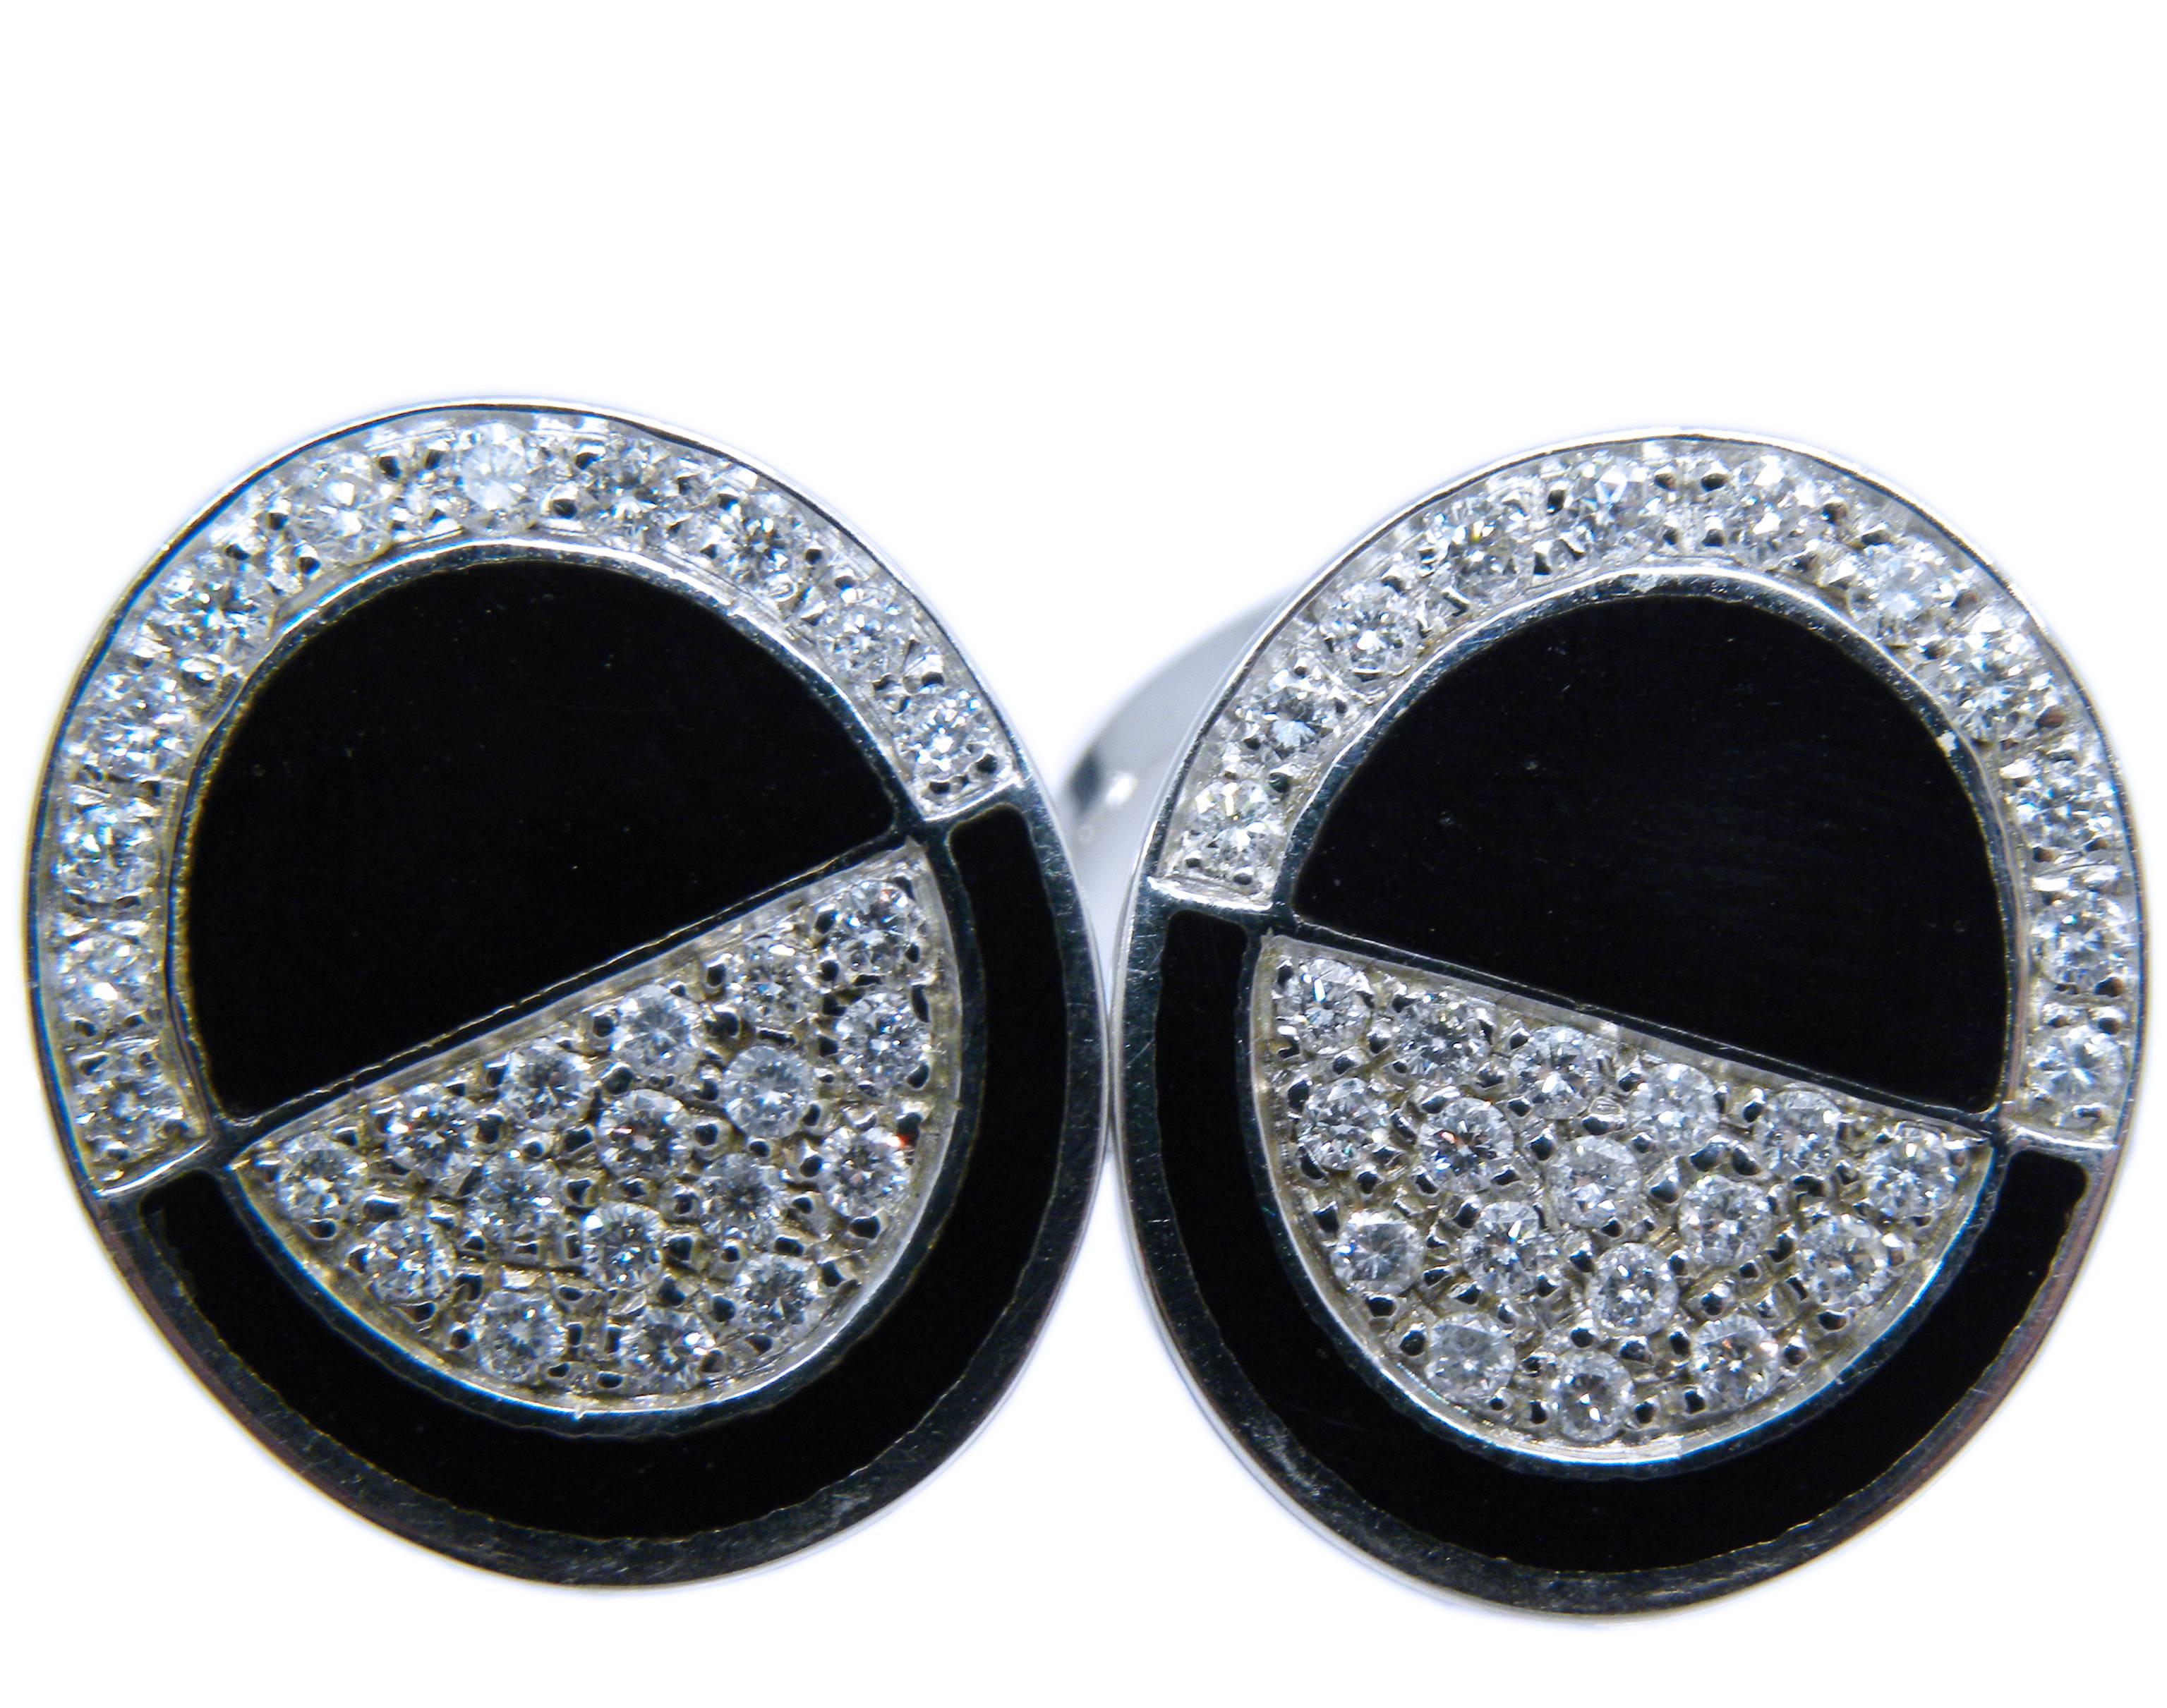 Smart, Chic yet Timeless Black and White Cufflinks, Art Déco Style, featuring 0.70 Carat Top Quality White Diamond in an 18Kt White Gold Black Hand Enamelled Setting.
In our fitted suede leather case and pouch.
